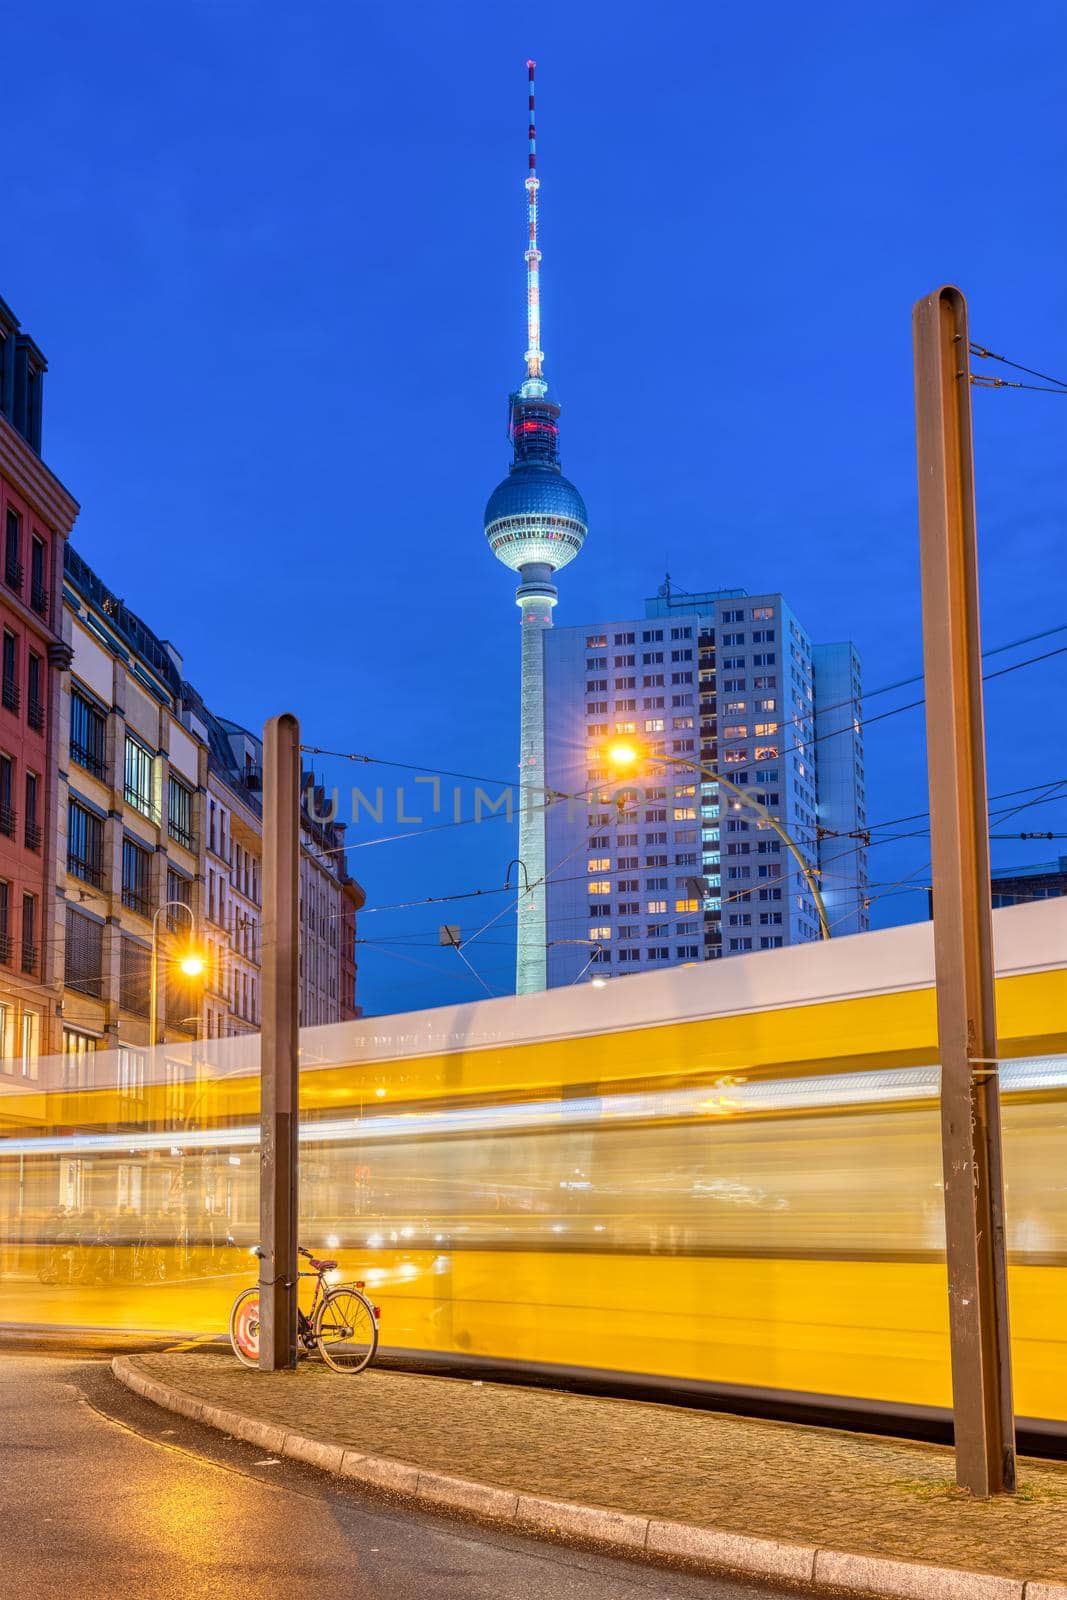 The famous TV Tower in Berlin at night with a moving tramway